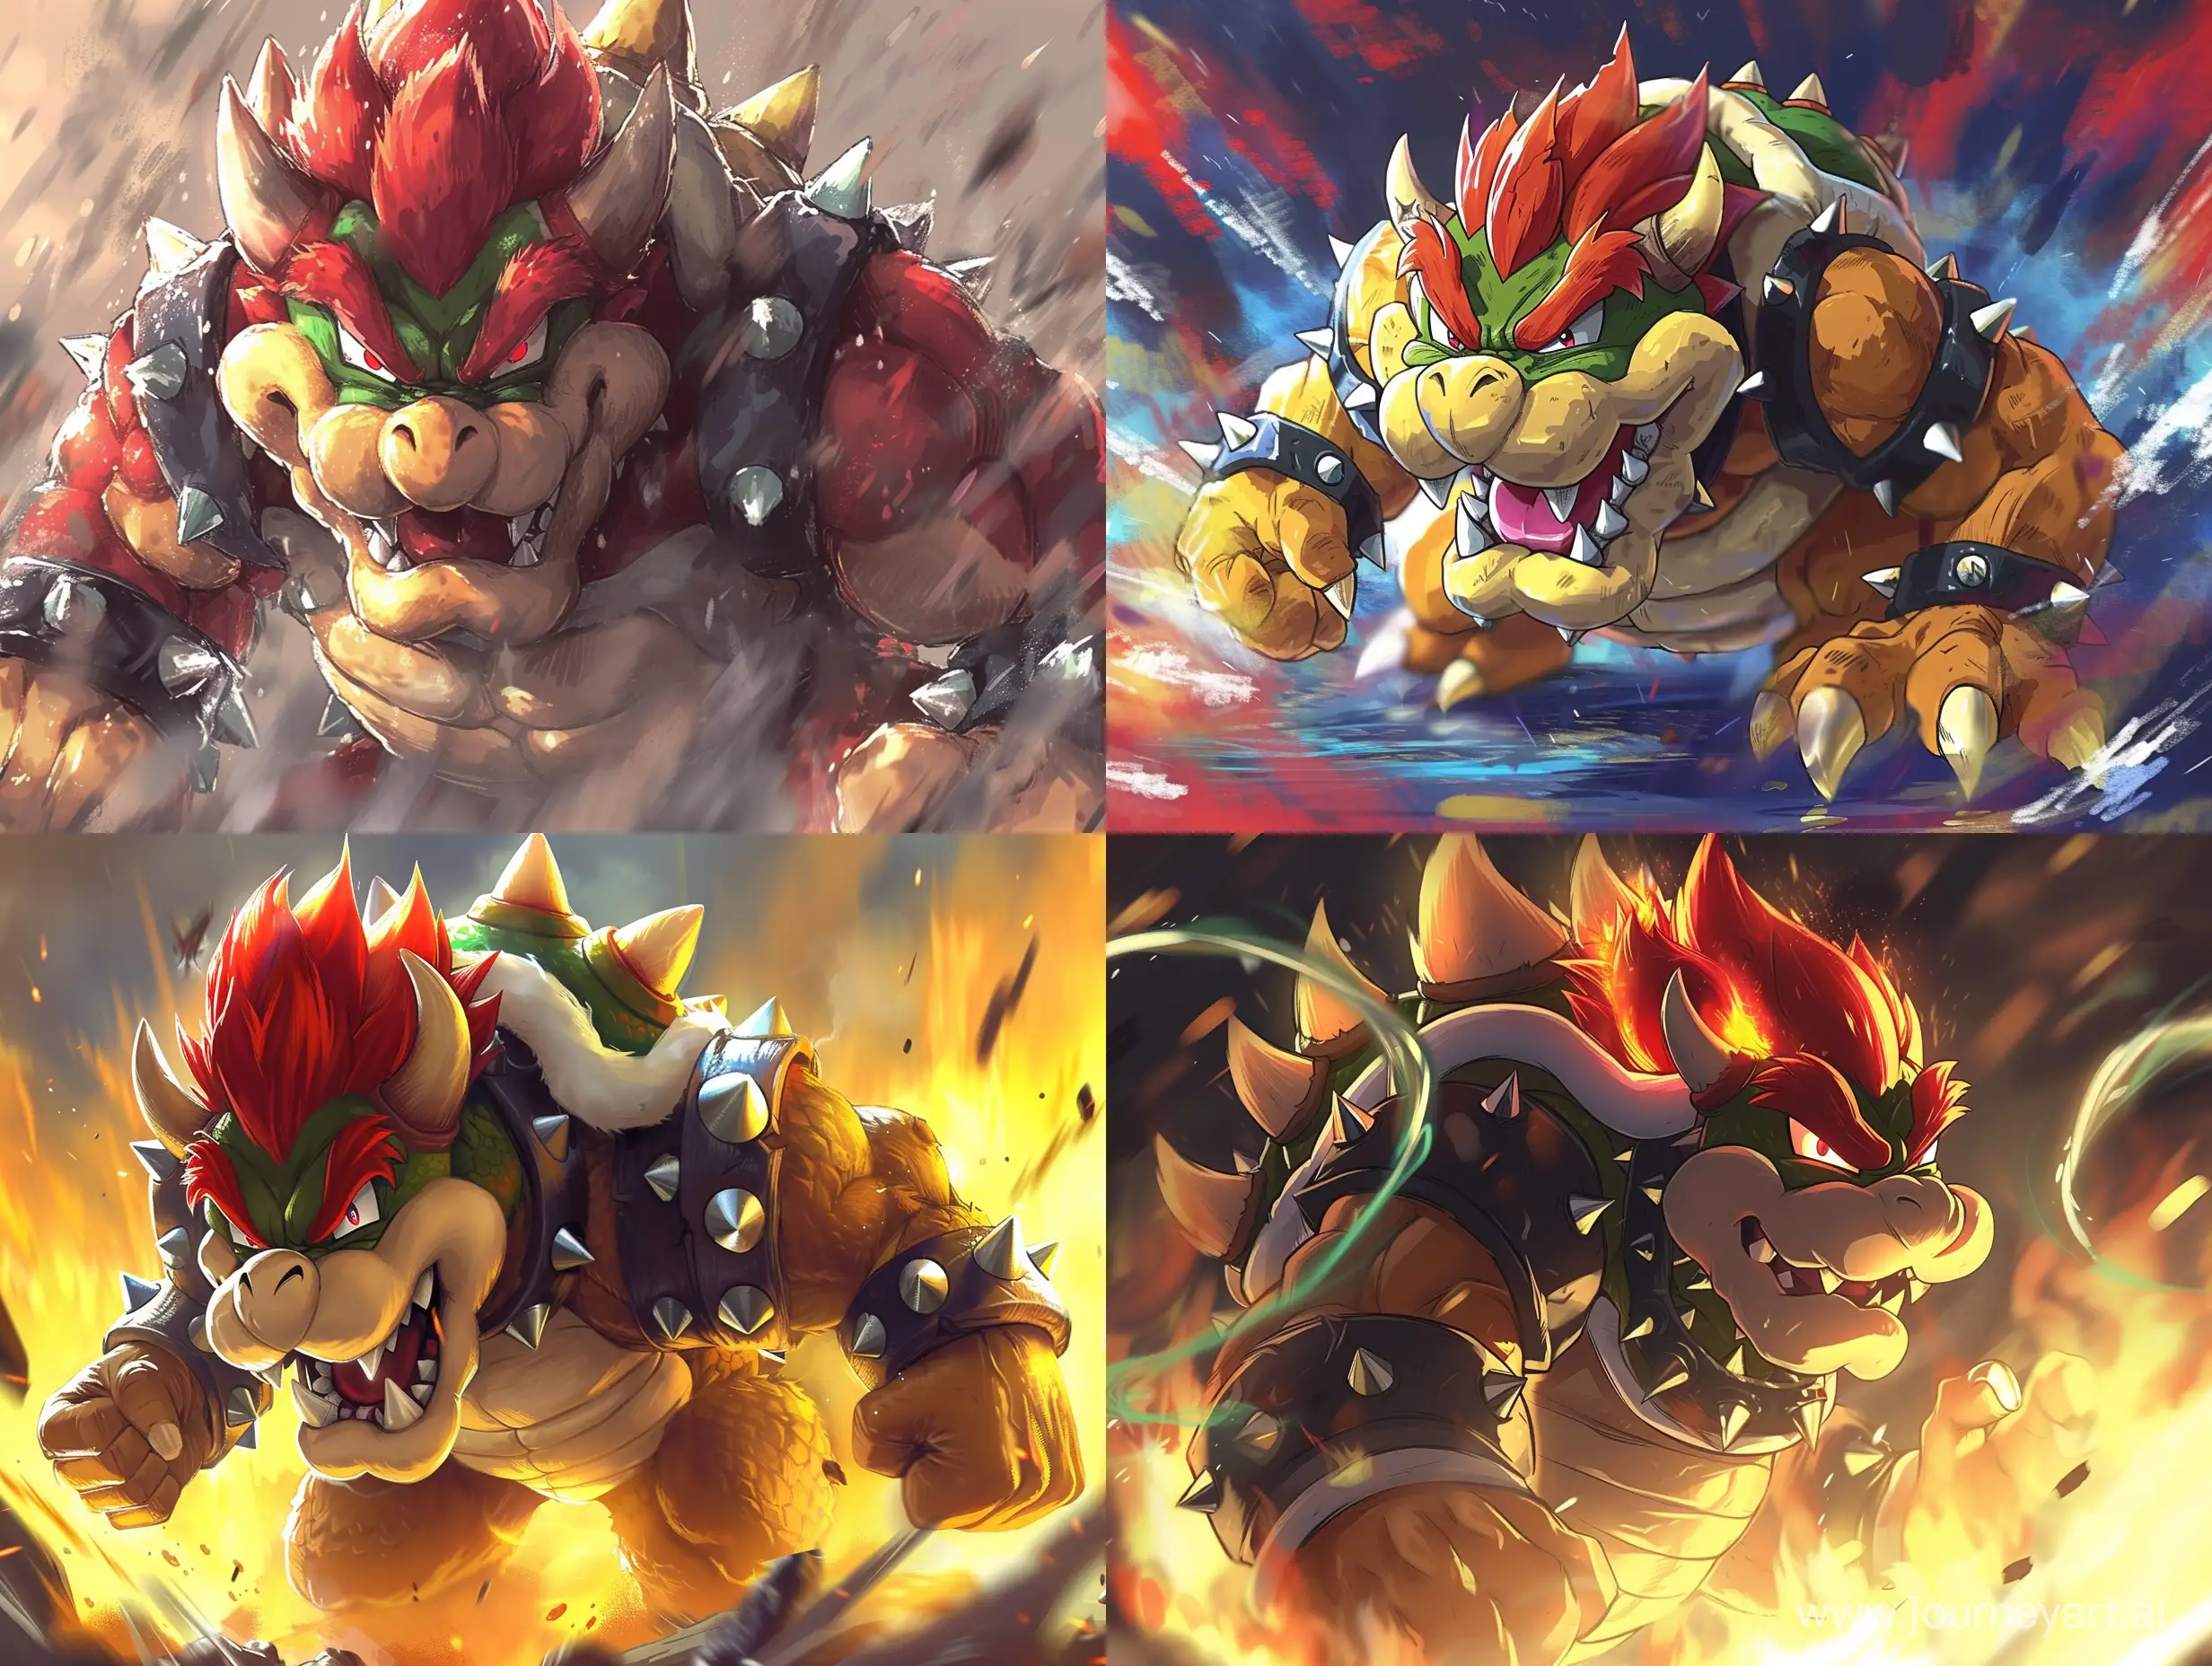 Bowser in the art style of Dragonball super